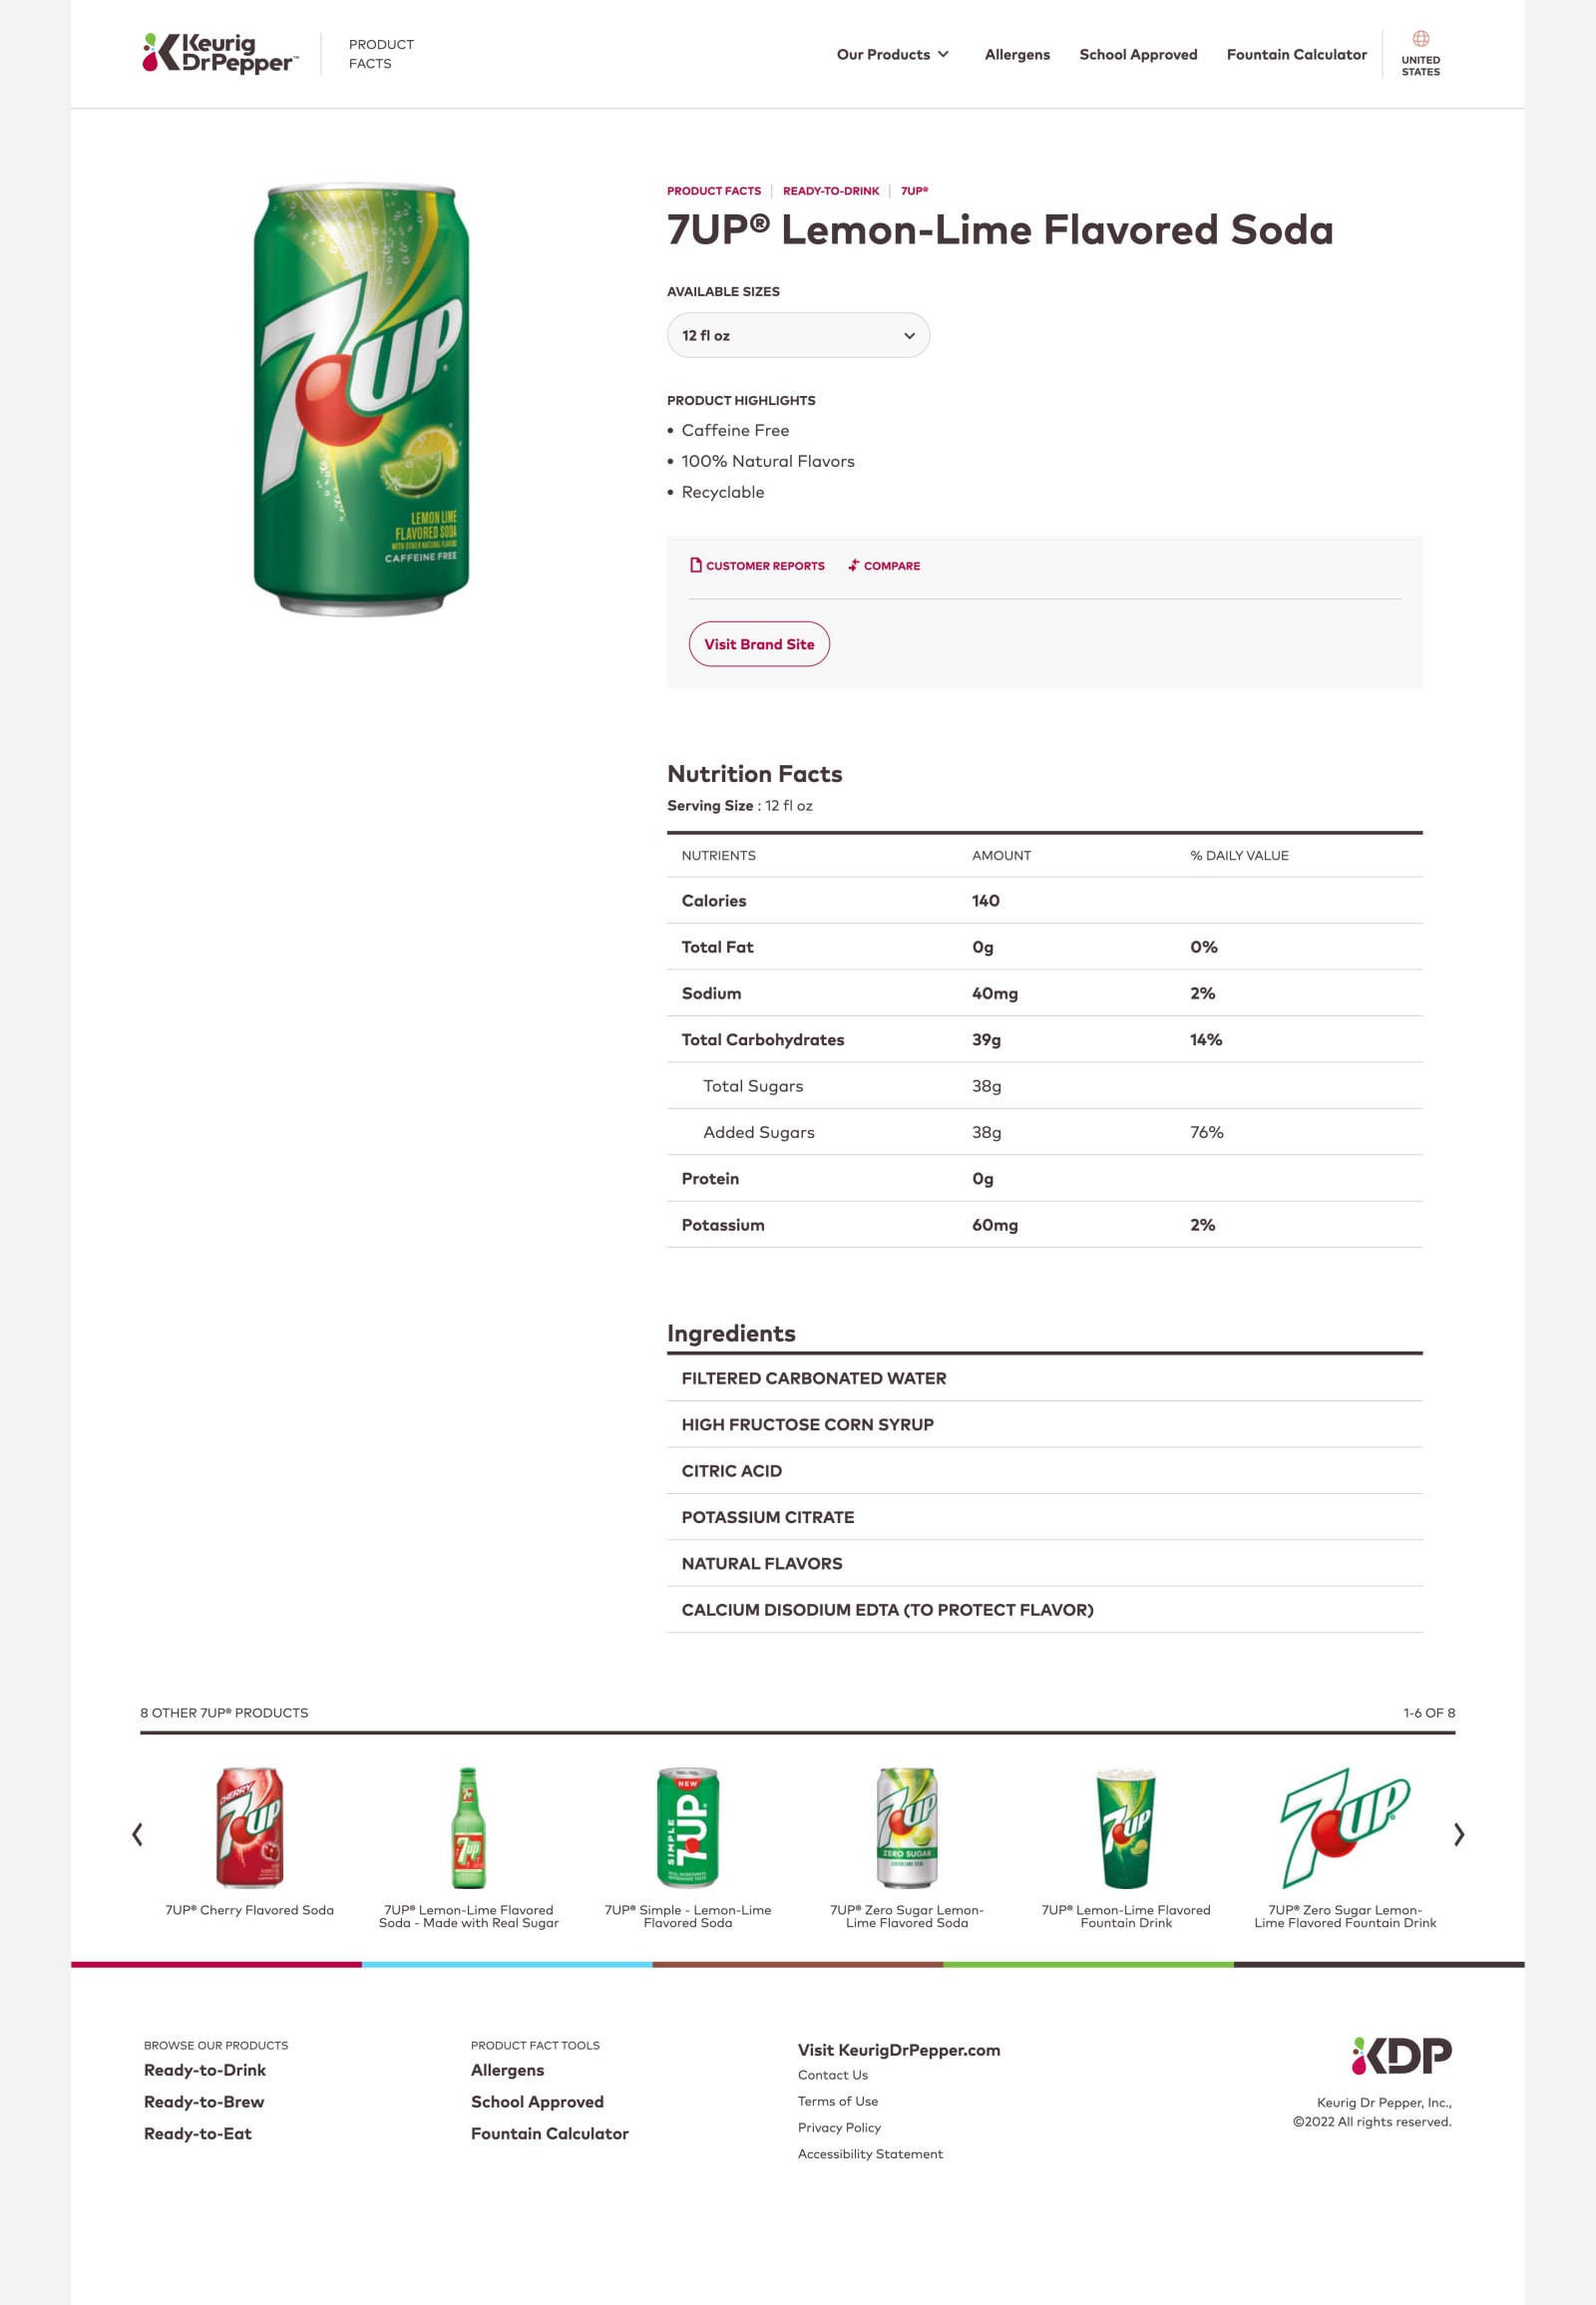 ready-to-drink product detail page